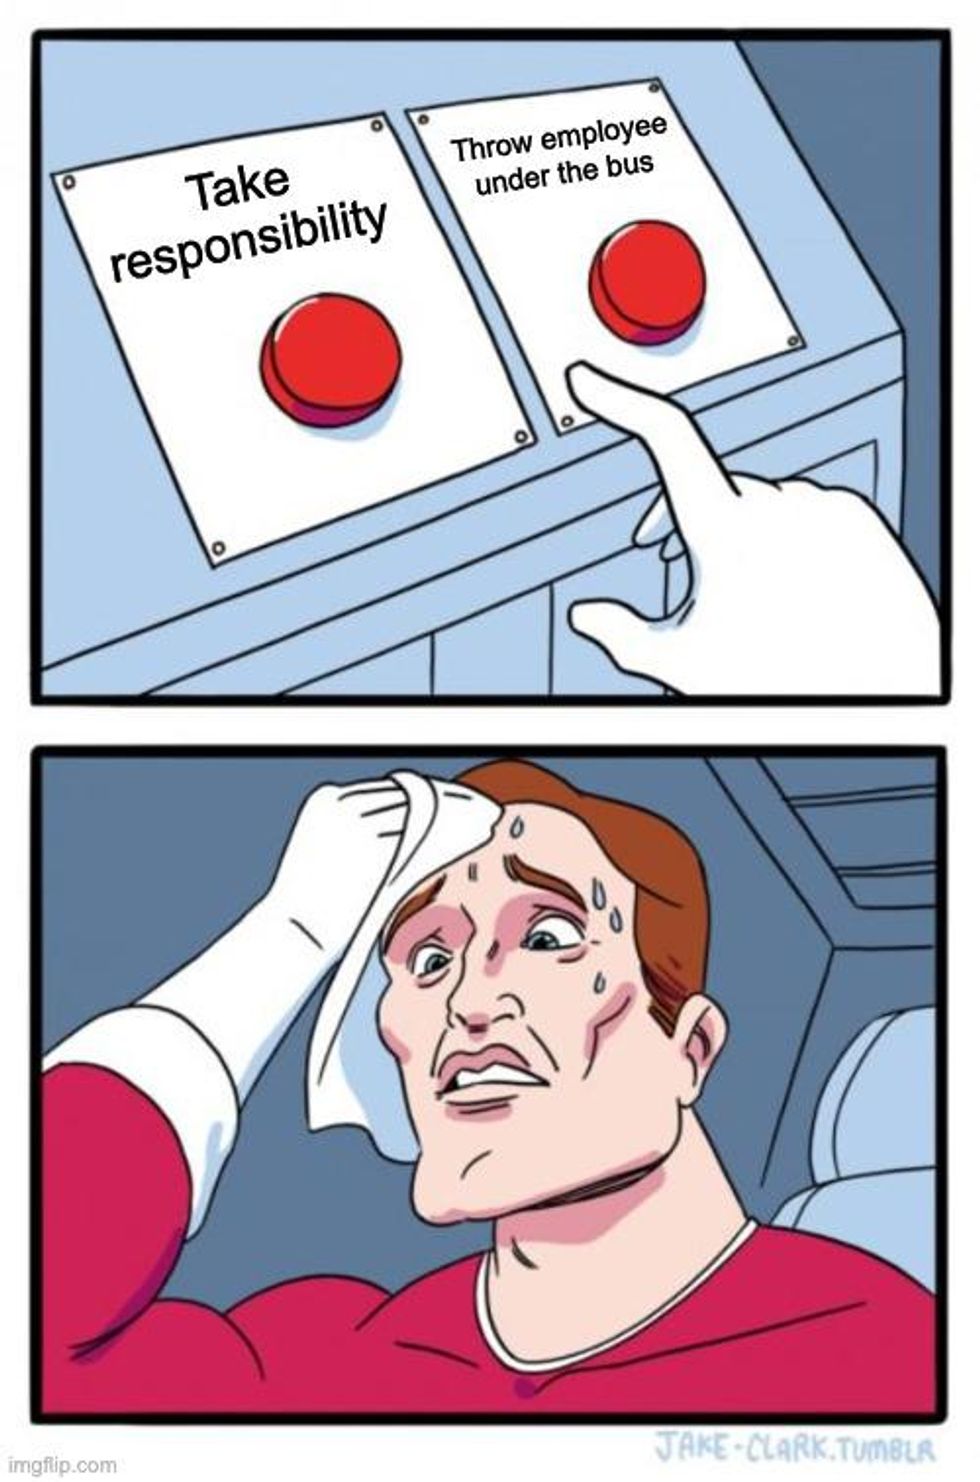 two buttons boss meme: left button = take responsibility, right button = throw employee under the bus